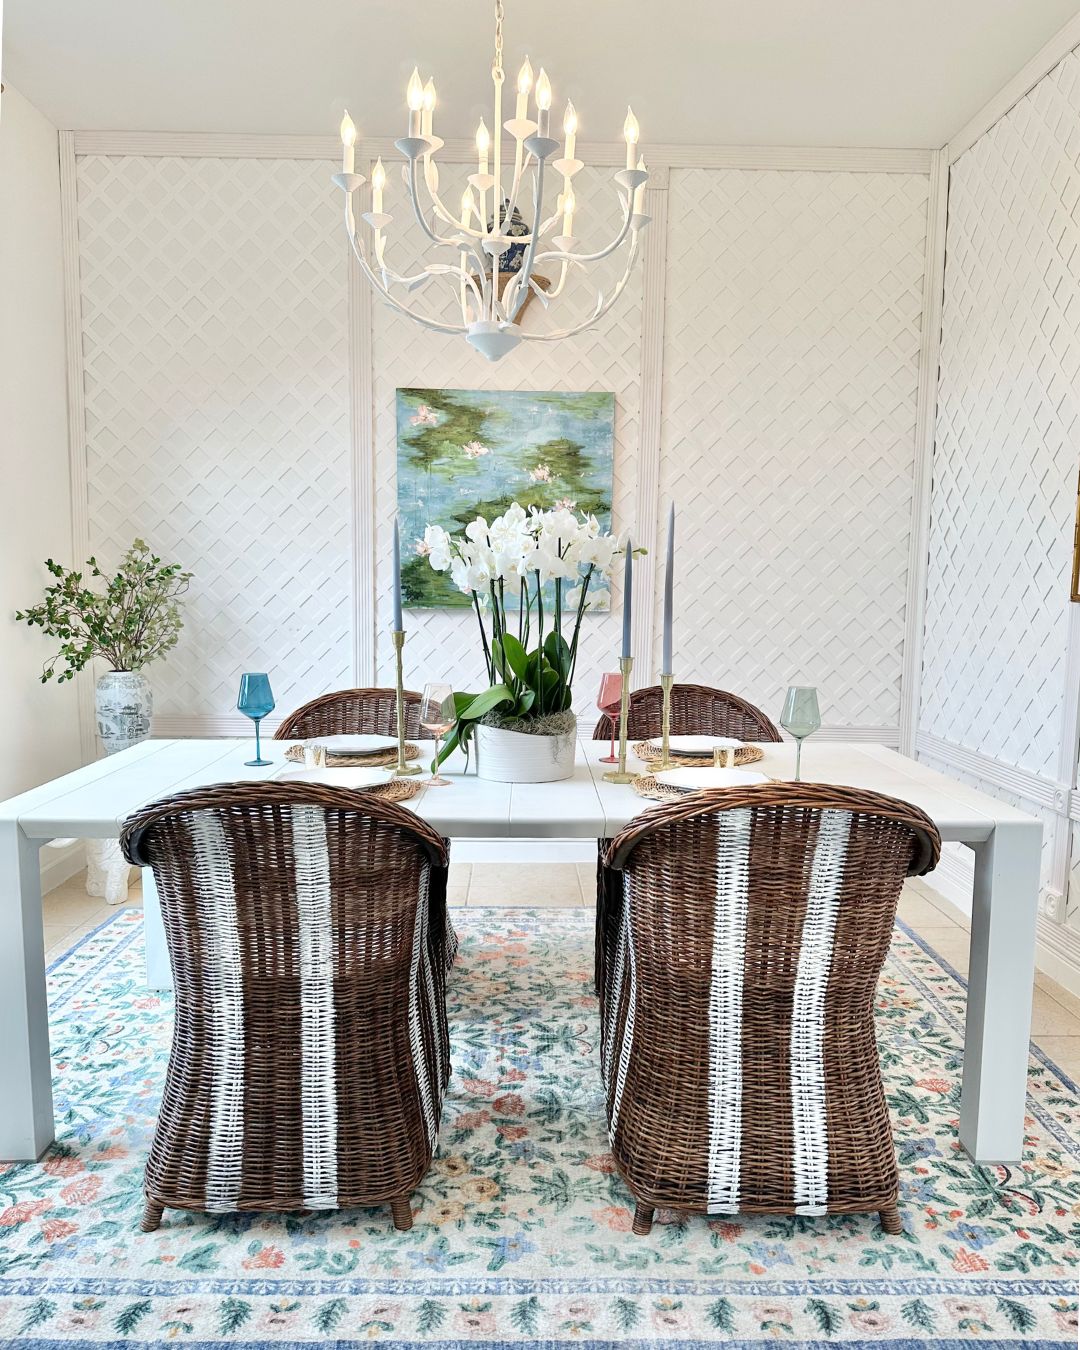 Selling Our Florida House: Making Over the Lattice Room for Buyers | Coastal Grandmillennial Dining Room Style